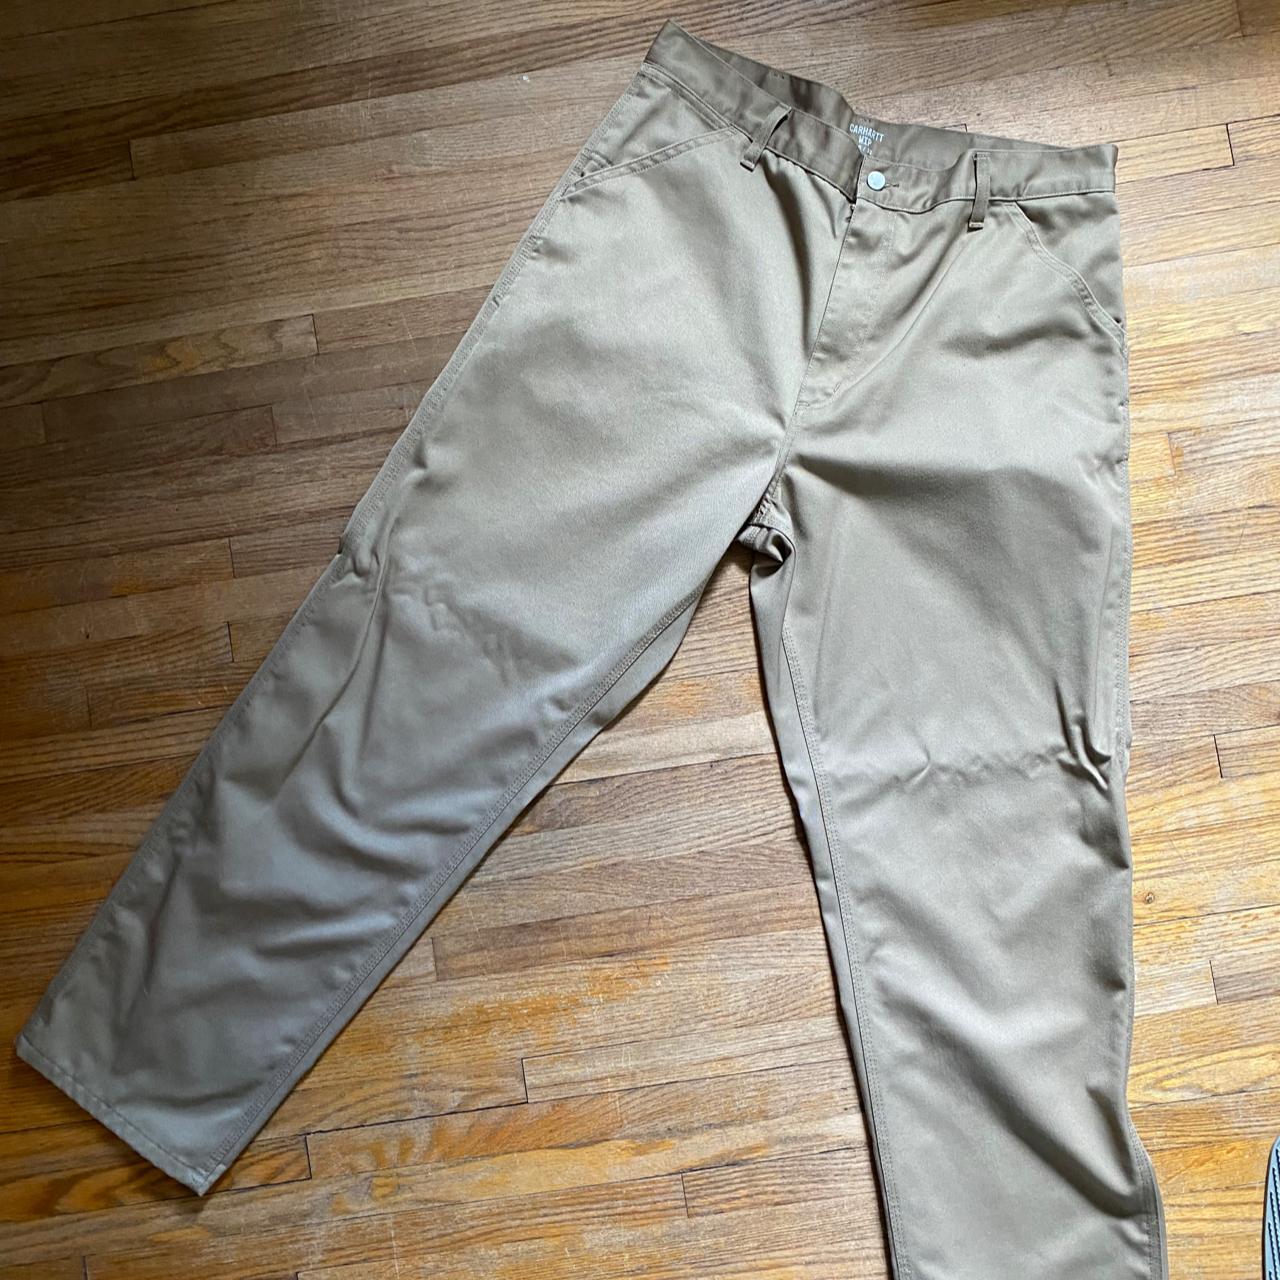 Product Image 1 - CARHARTT WIP SIMPLE PANT size